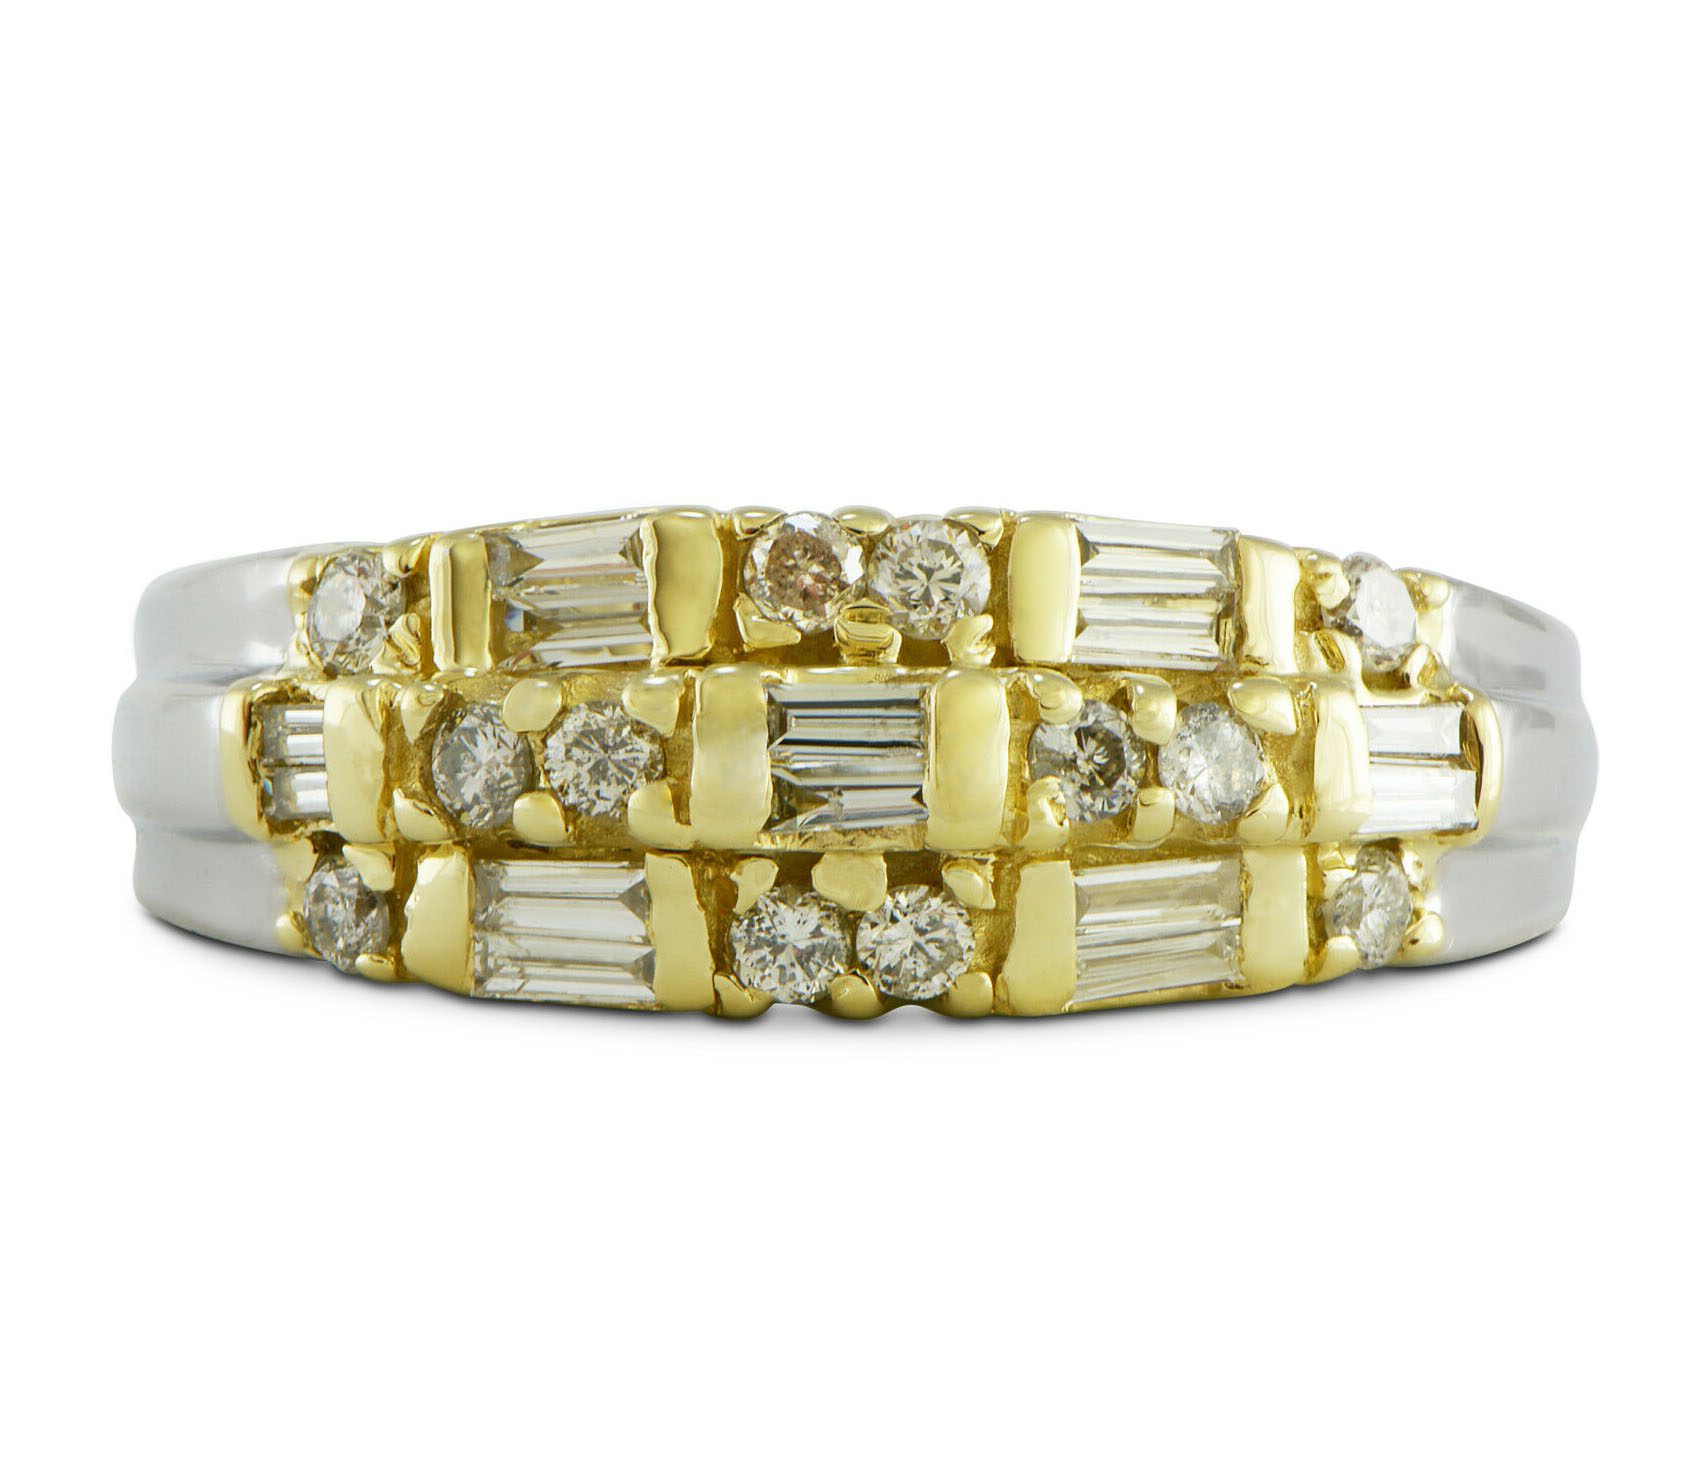 14k-Two-Tone-Gold-Diamond-Ring-75ct-TW-Size-65-SI-Clarity-H-Color-Bead-Set-112454231388